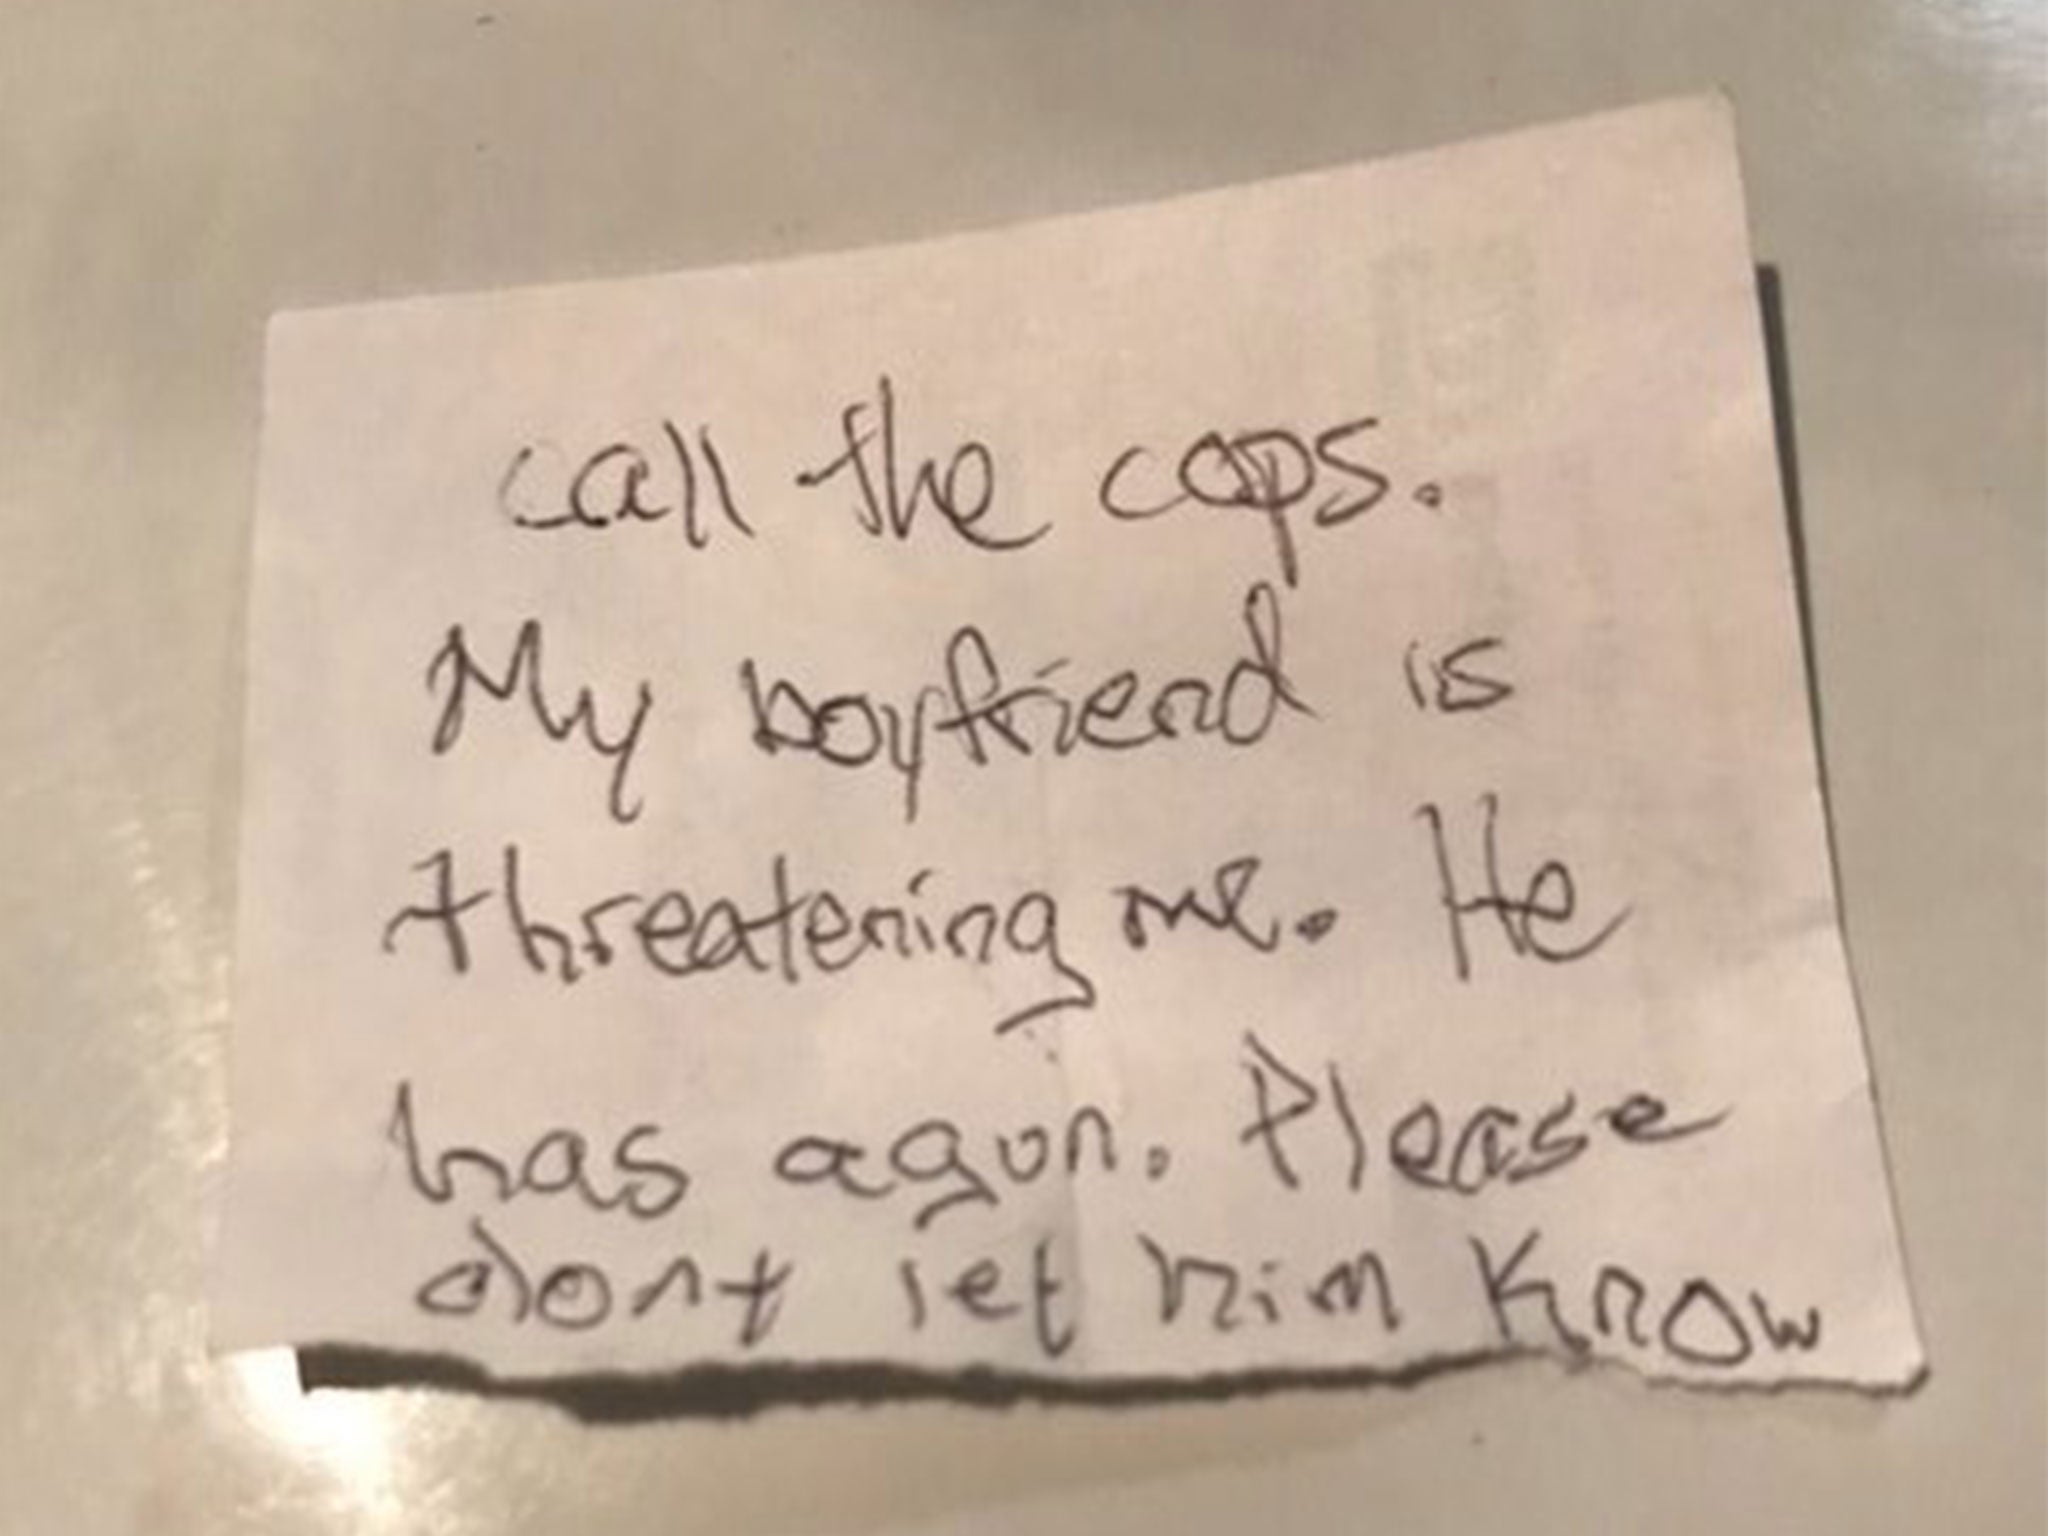 The note led to the arrest of convicted felon Jeremy Floyd